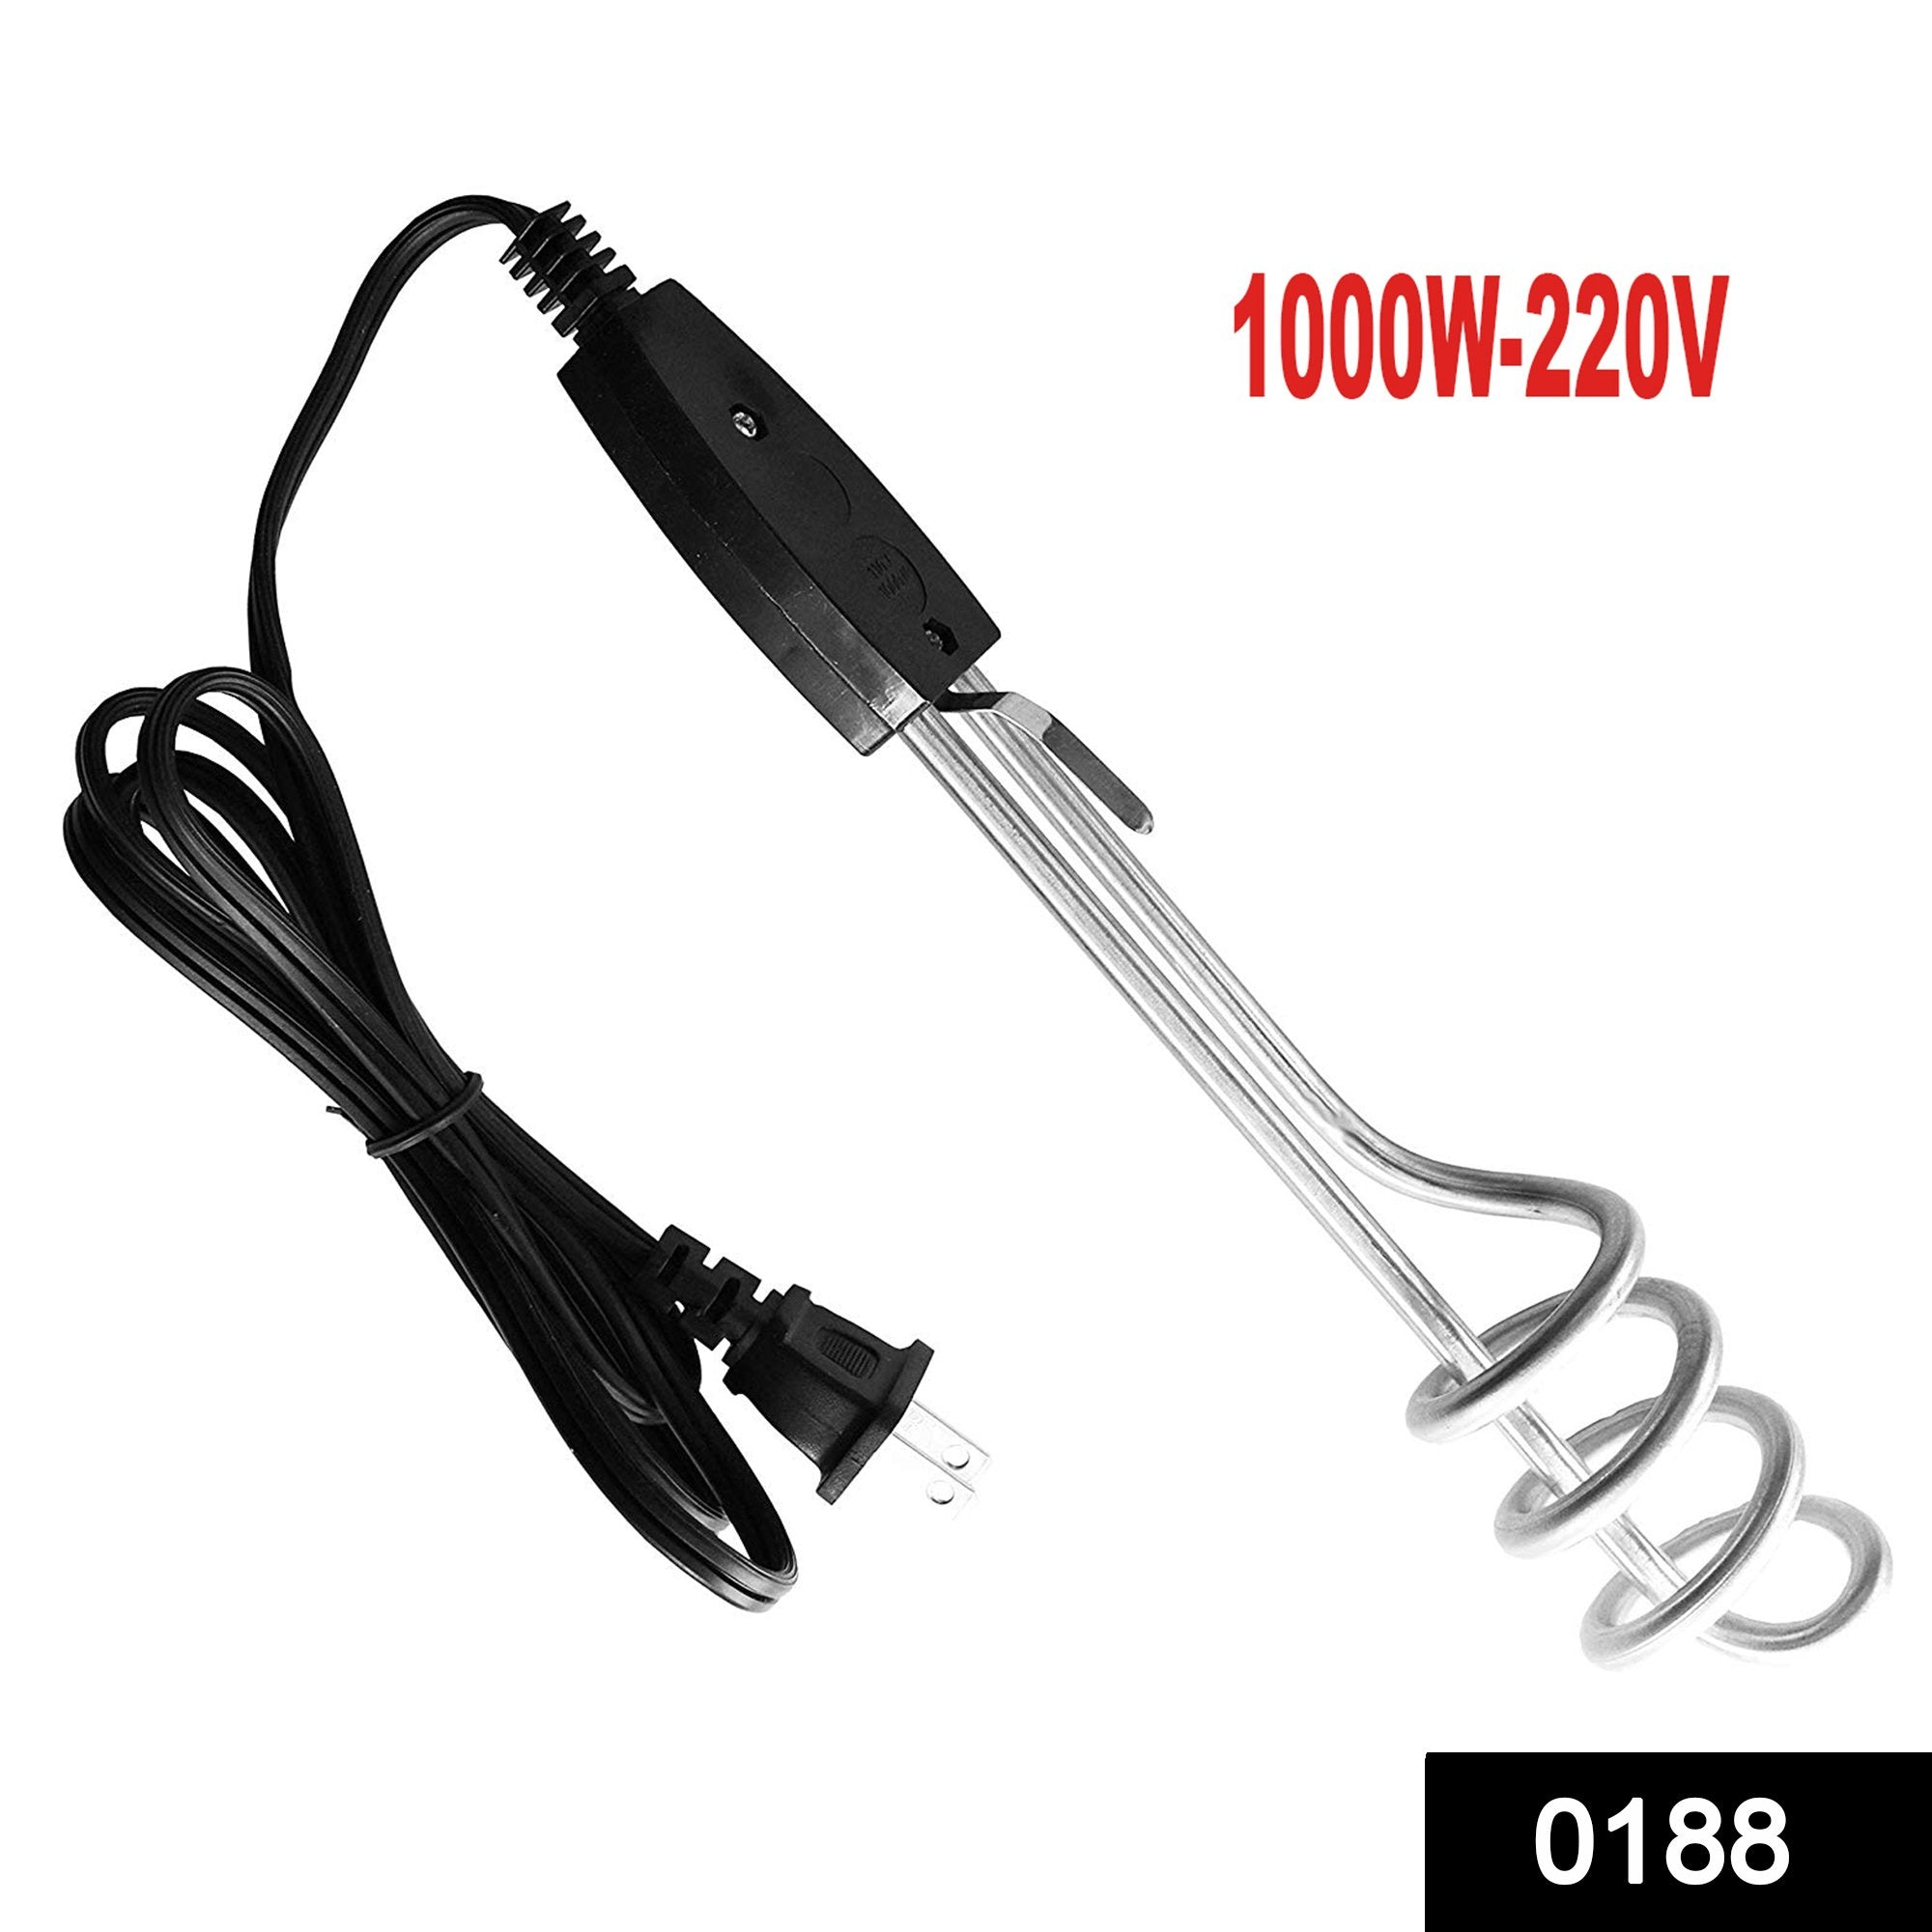 188 1000w 110v water heater portable electric immersion element boiler